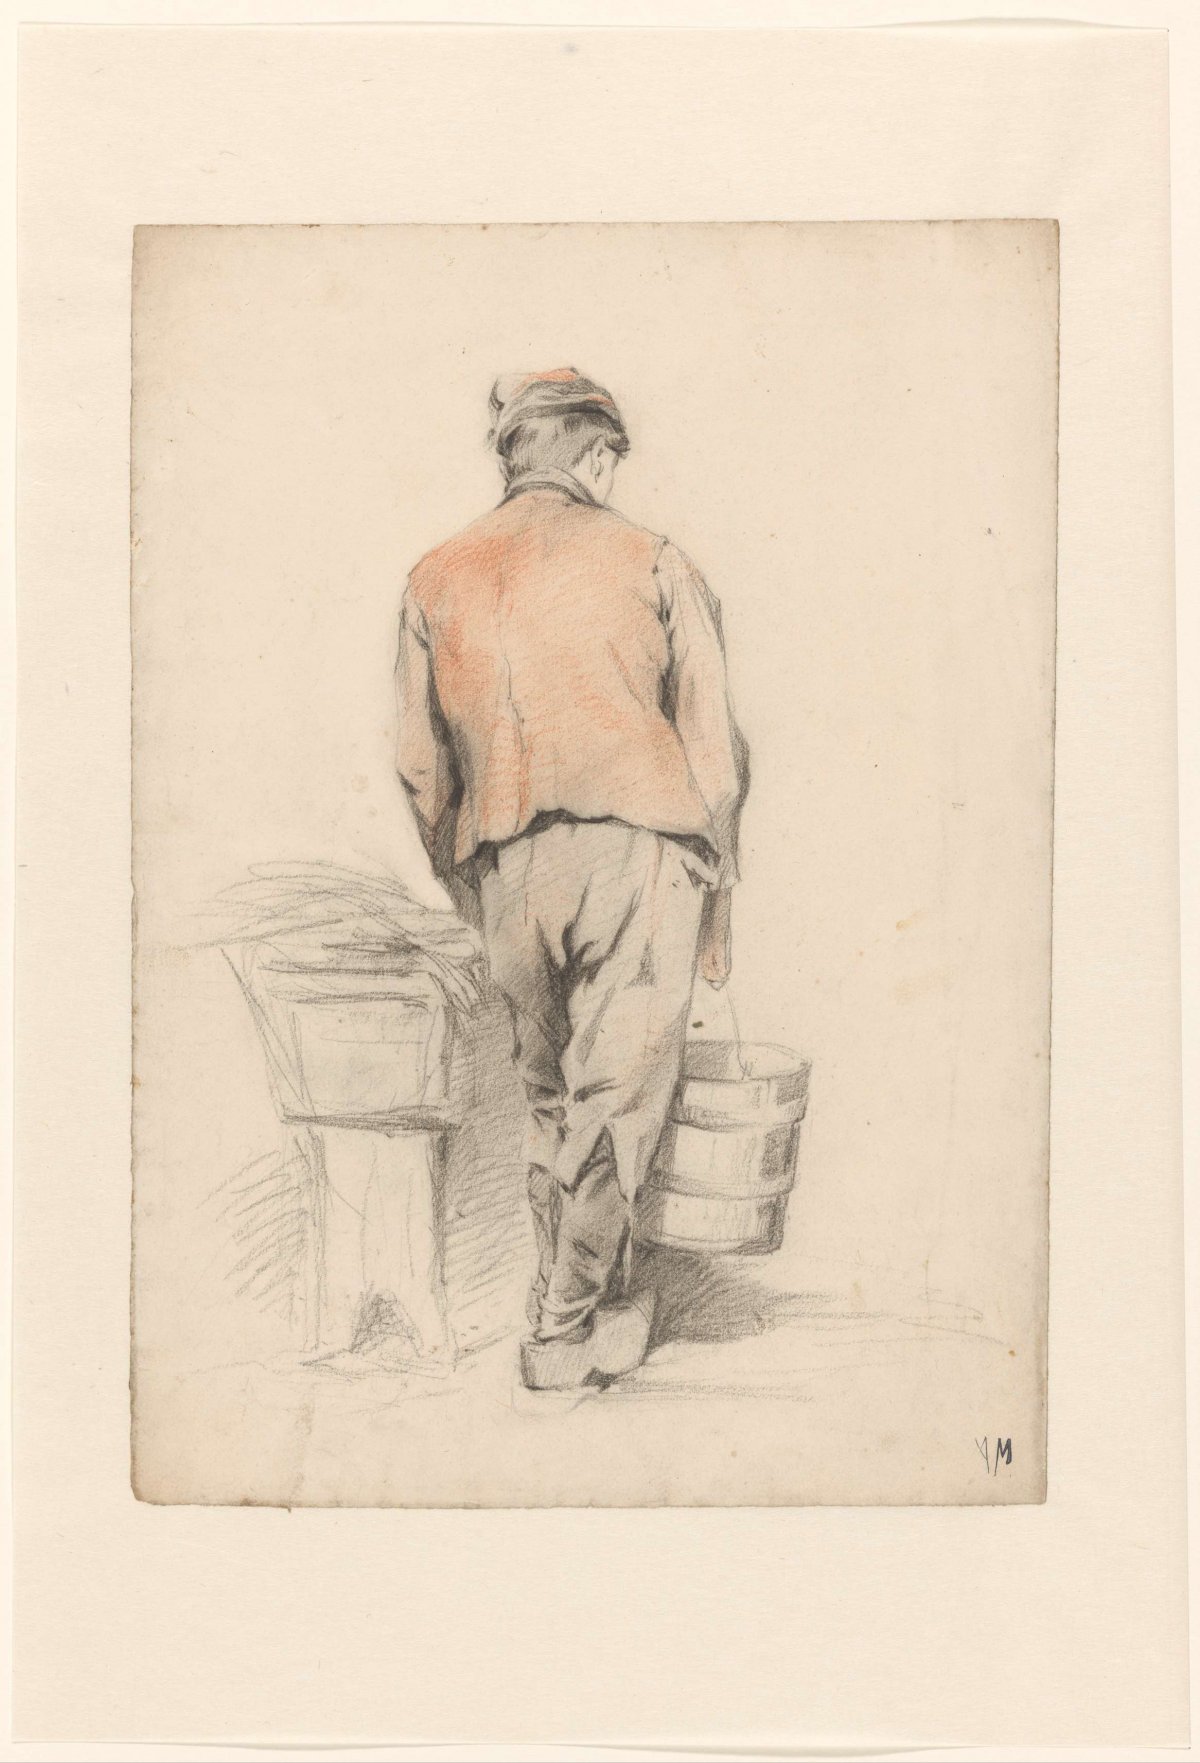 Standing boy with bucket, seen from the back, Anton Mauve, 1848 - 1888